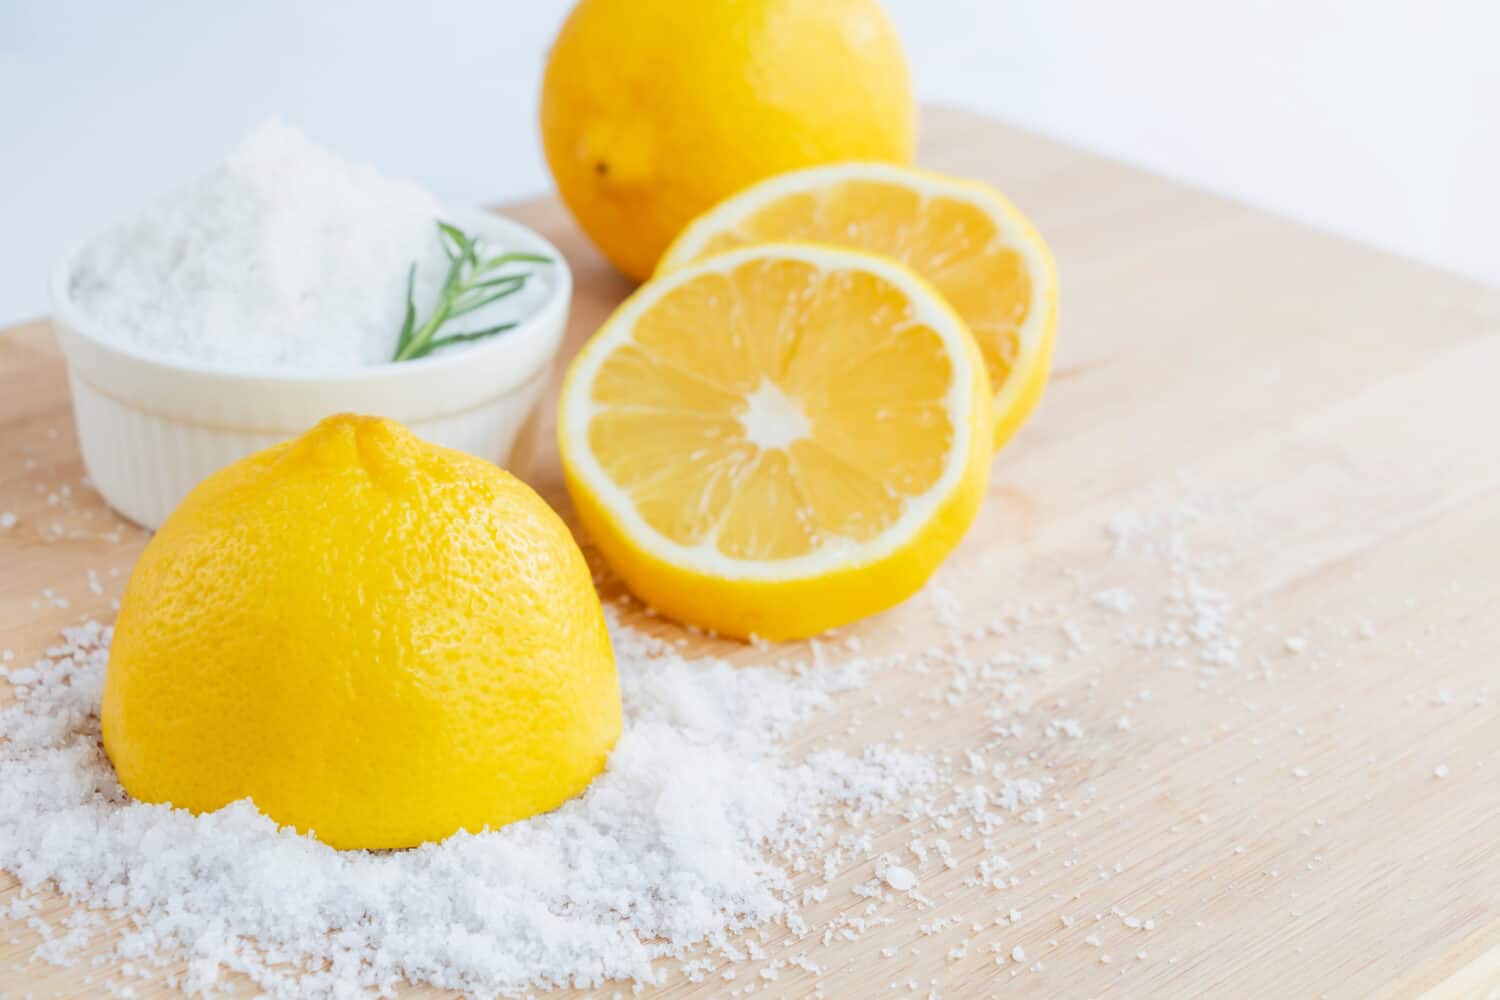 Lemon and sea salt - Beauty treatment with organic cosmetics with lemon ingredients on wood and rosemary background for body scrub and spa care.